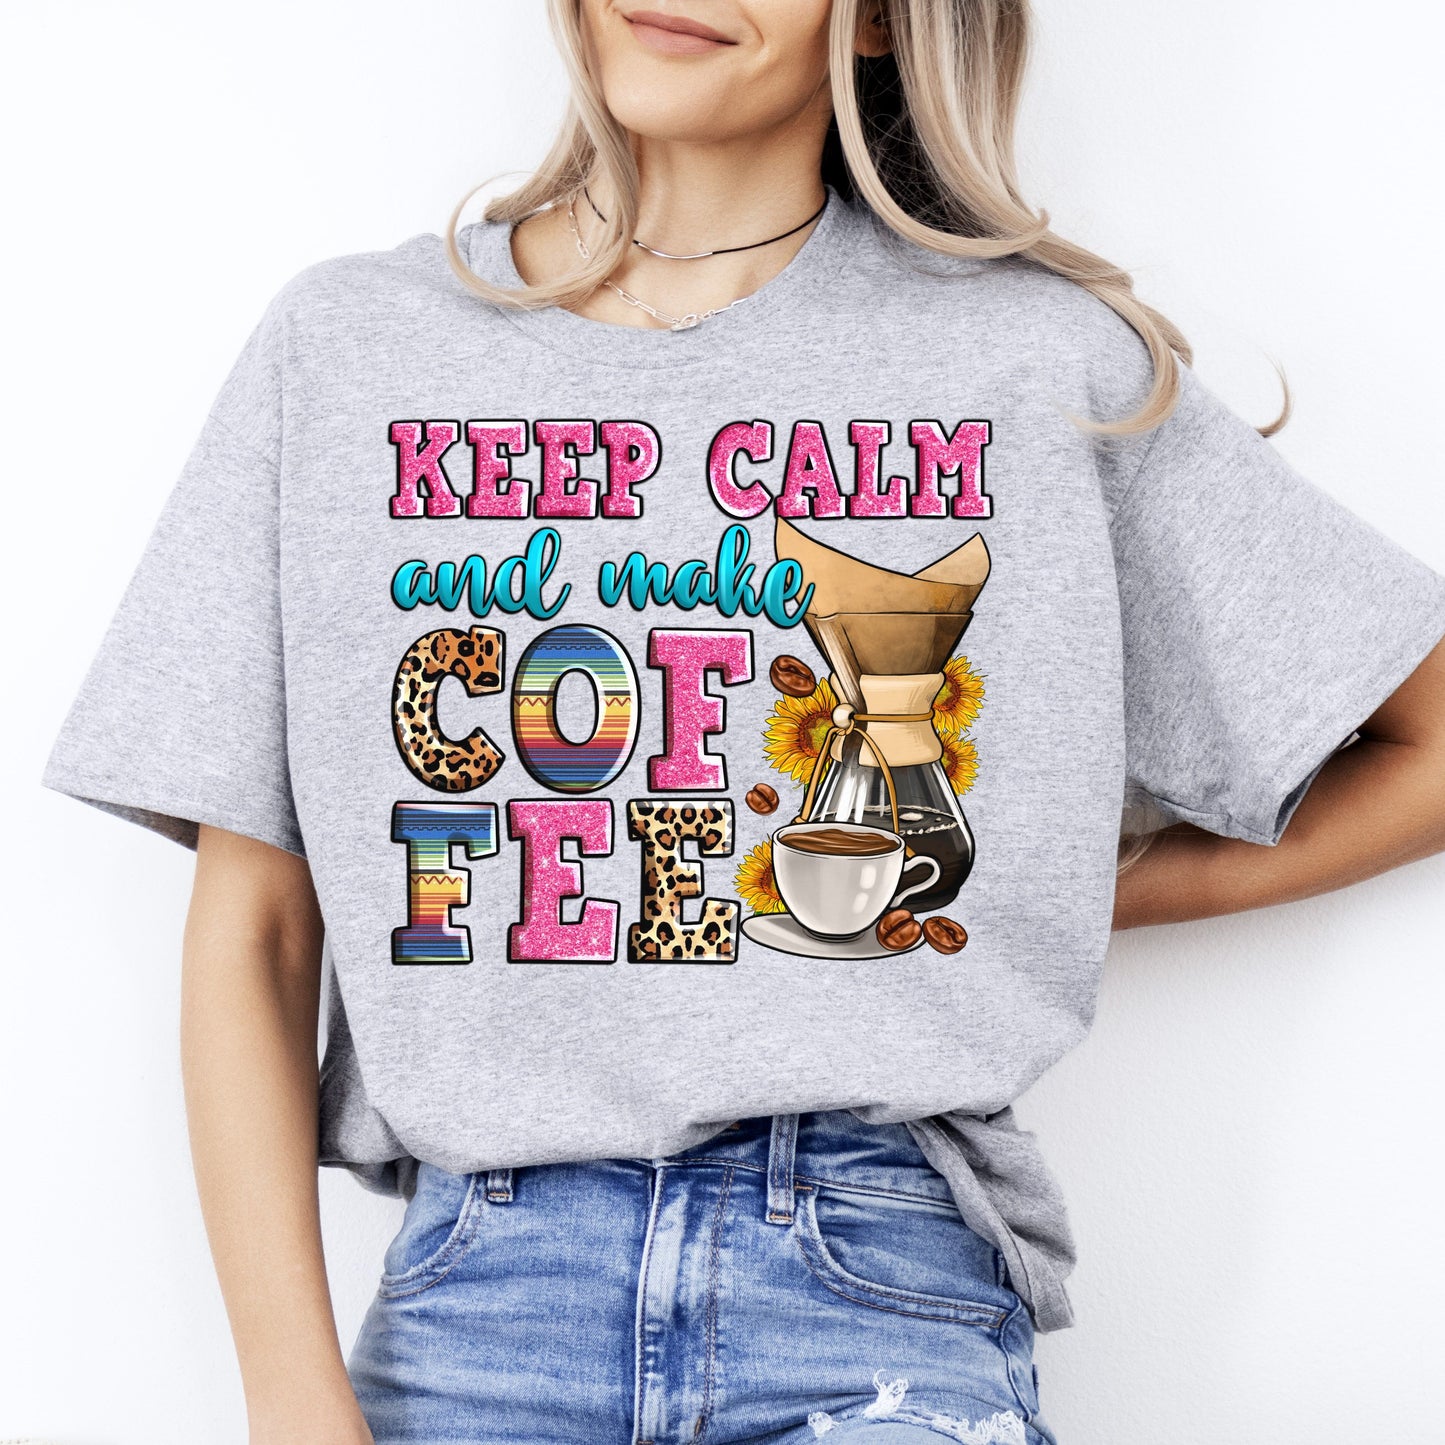 Keep calm and make coffee T-Shirt gift Coffee lover Unisex tee Sand White Sport Grey-Sport Grey-Family-Gift-Planet